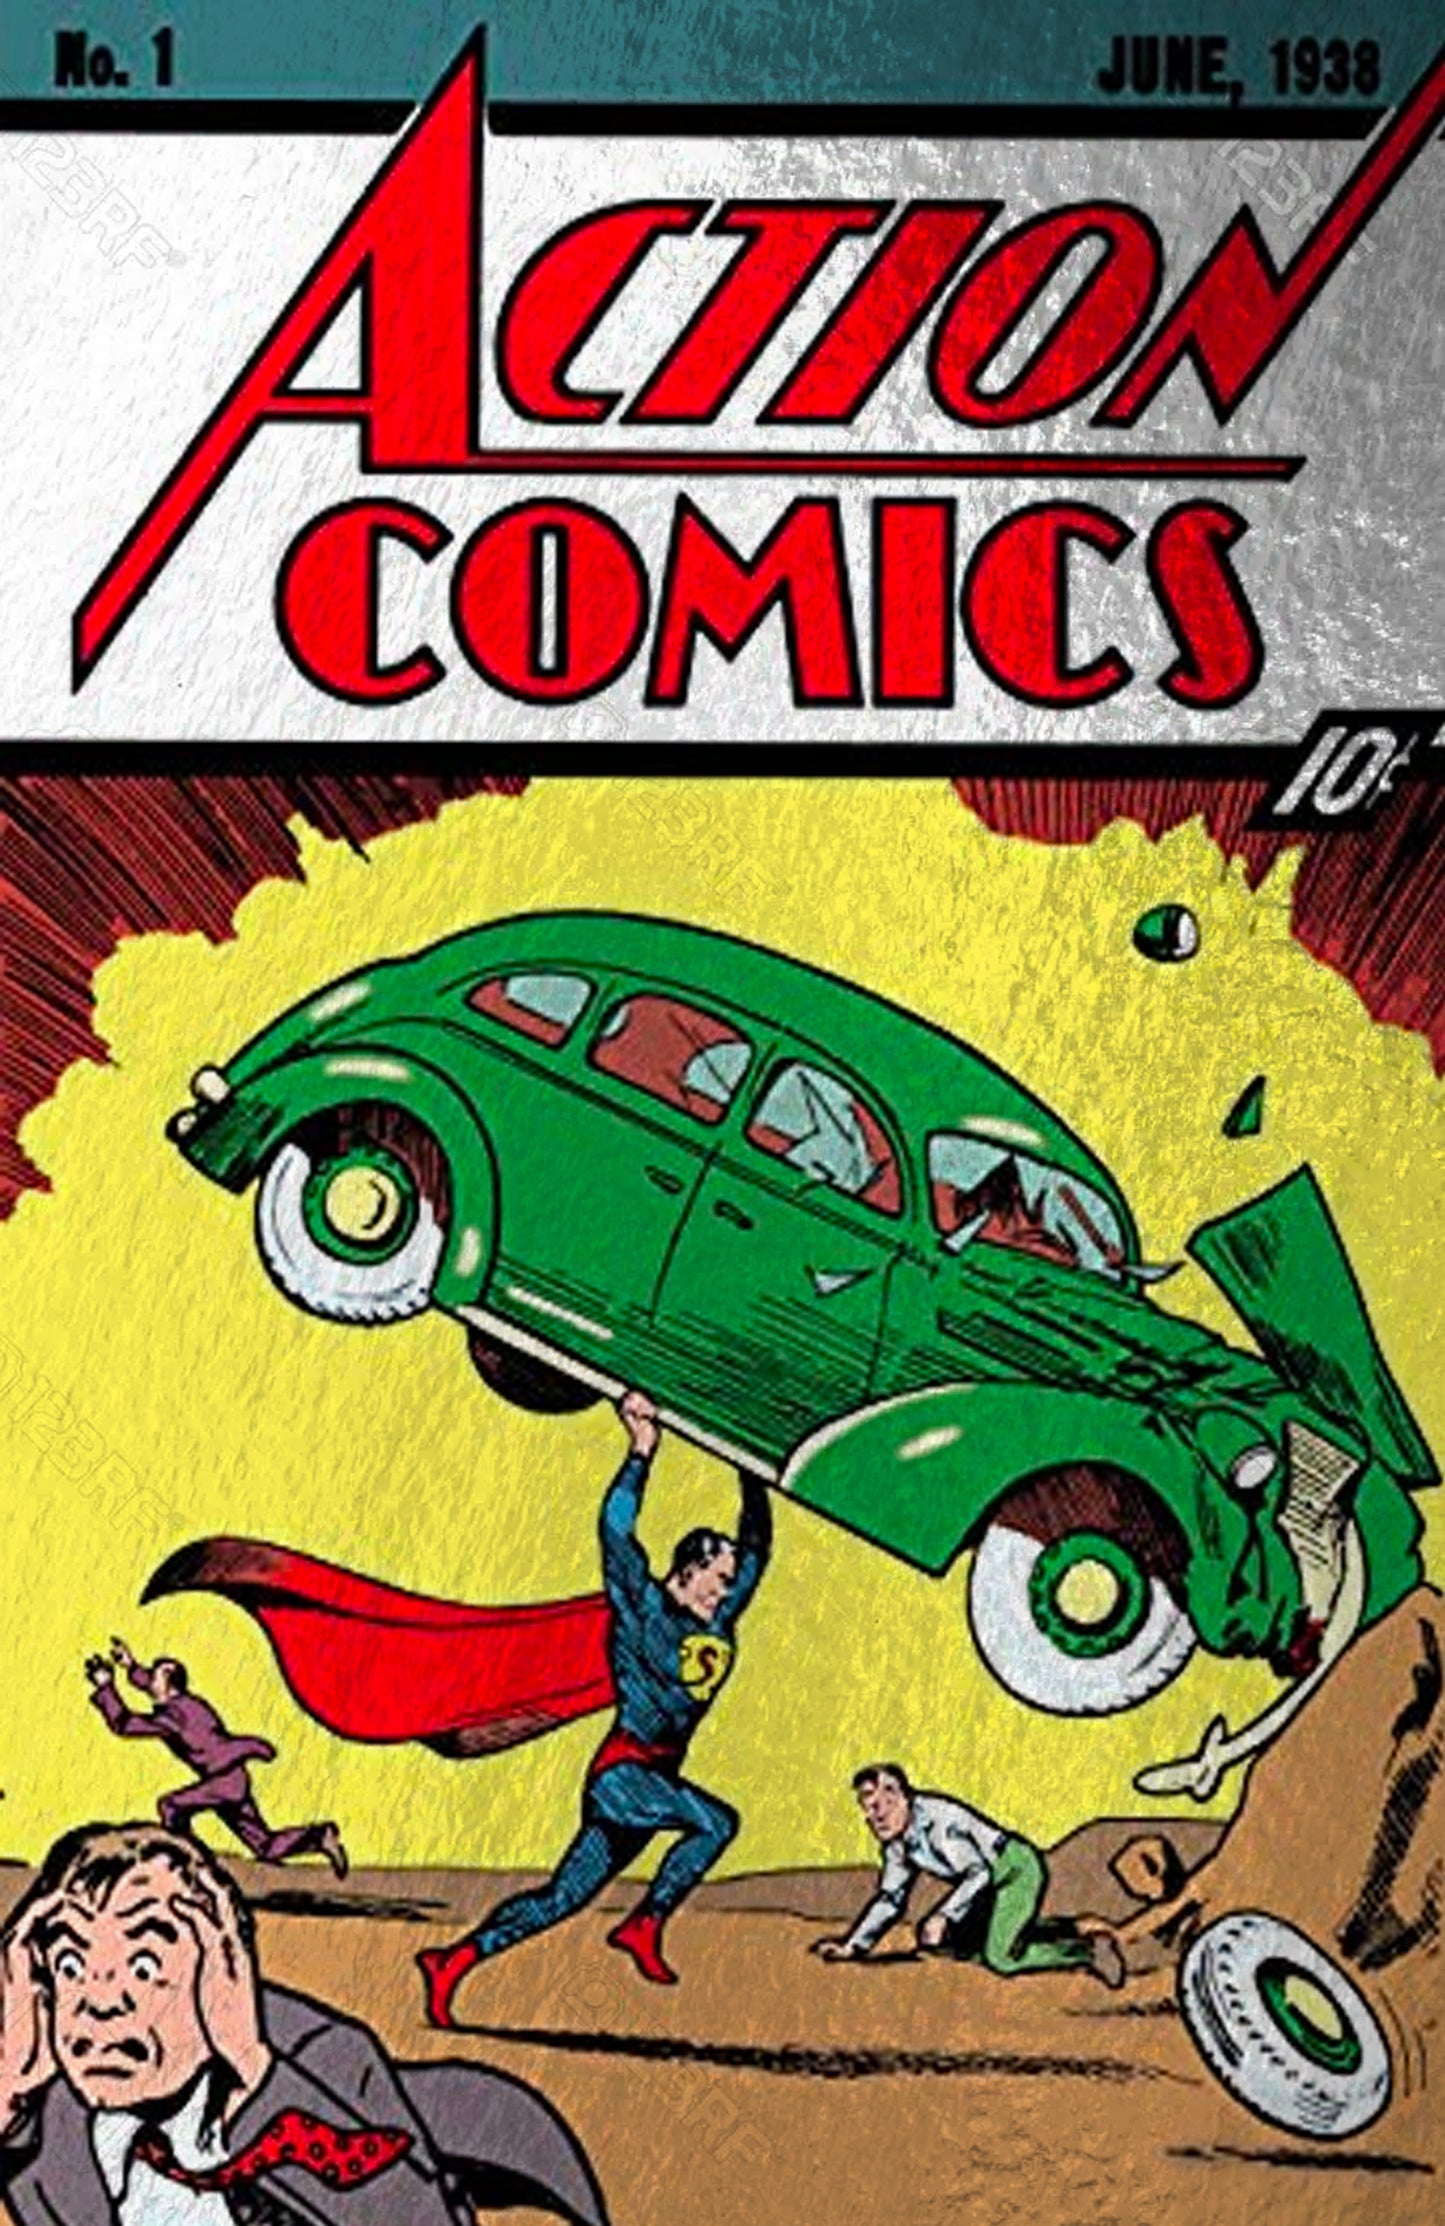 ACTION COMICS #1 FACSIMILE NYCC 2022 FOIL VARIANT LIMITED TO 1500 COPIES - RAW & CGC